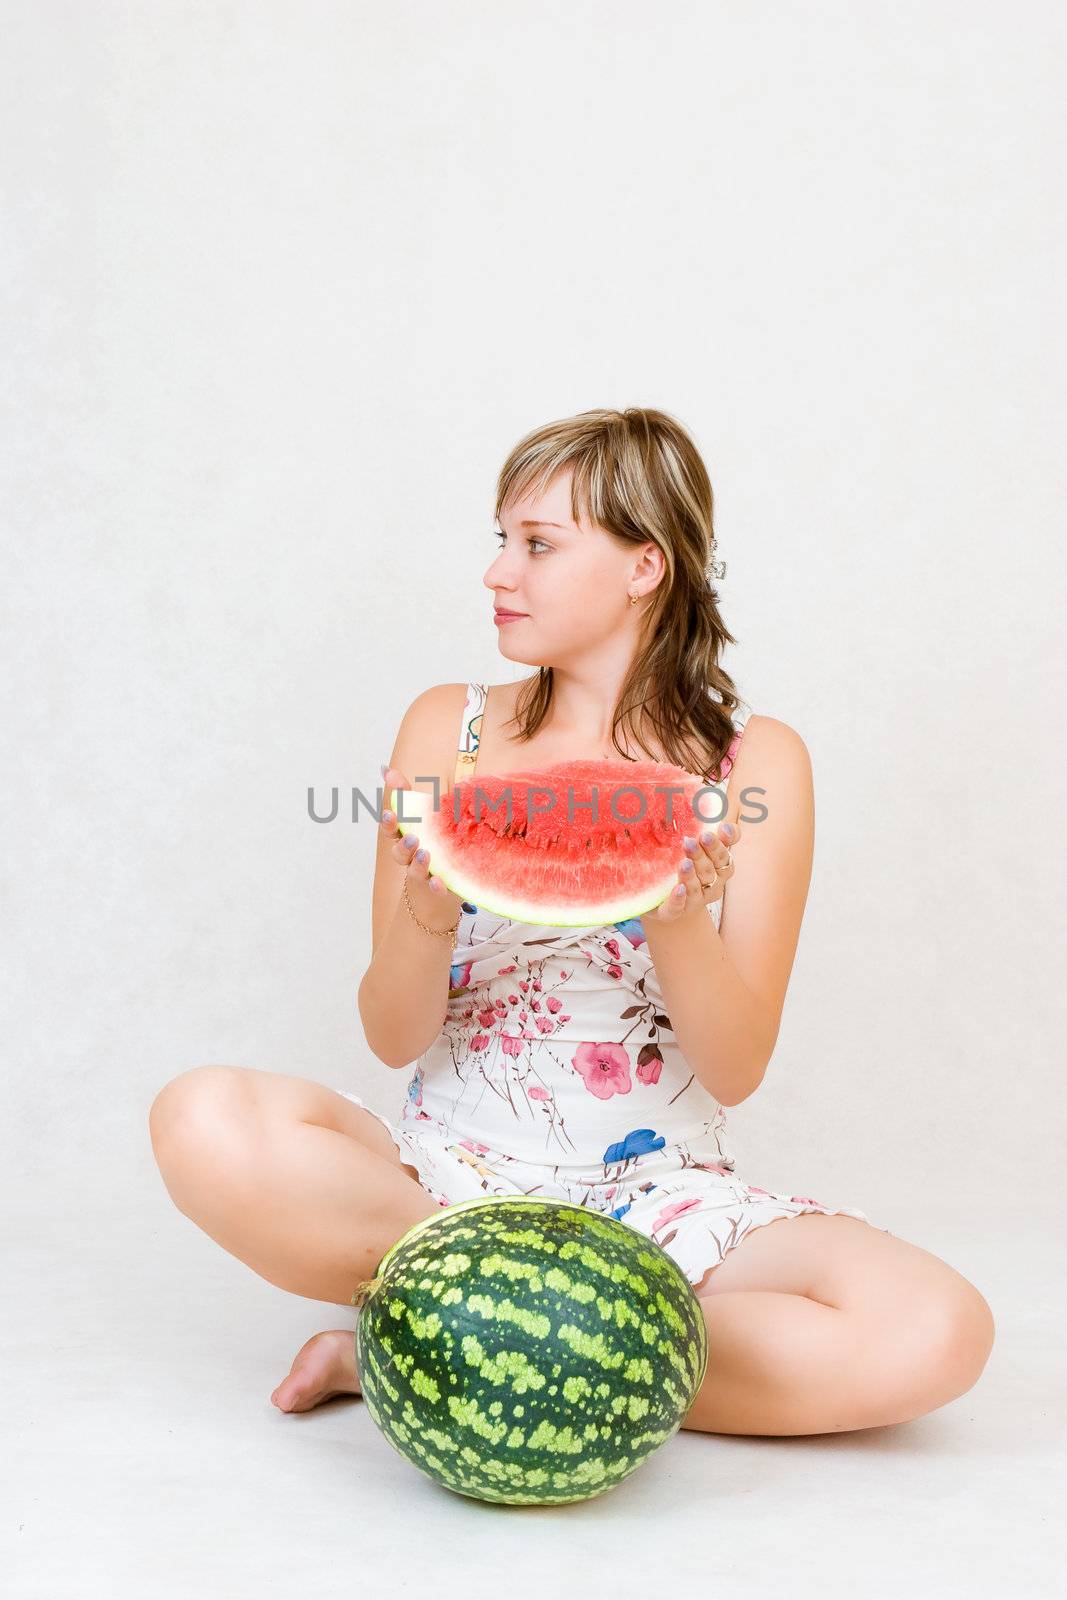 A sitting girl with a water melon in her hands